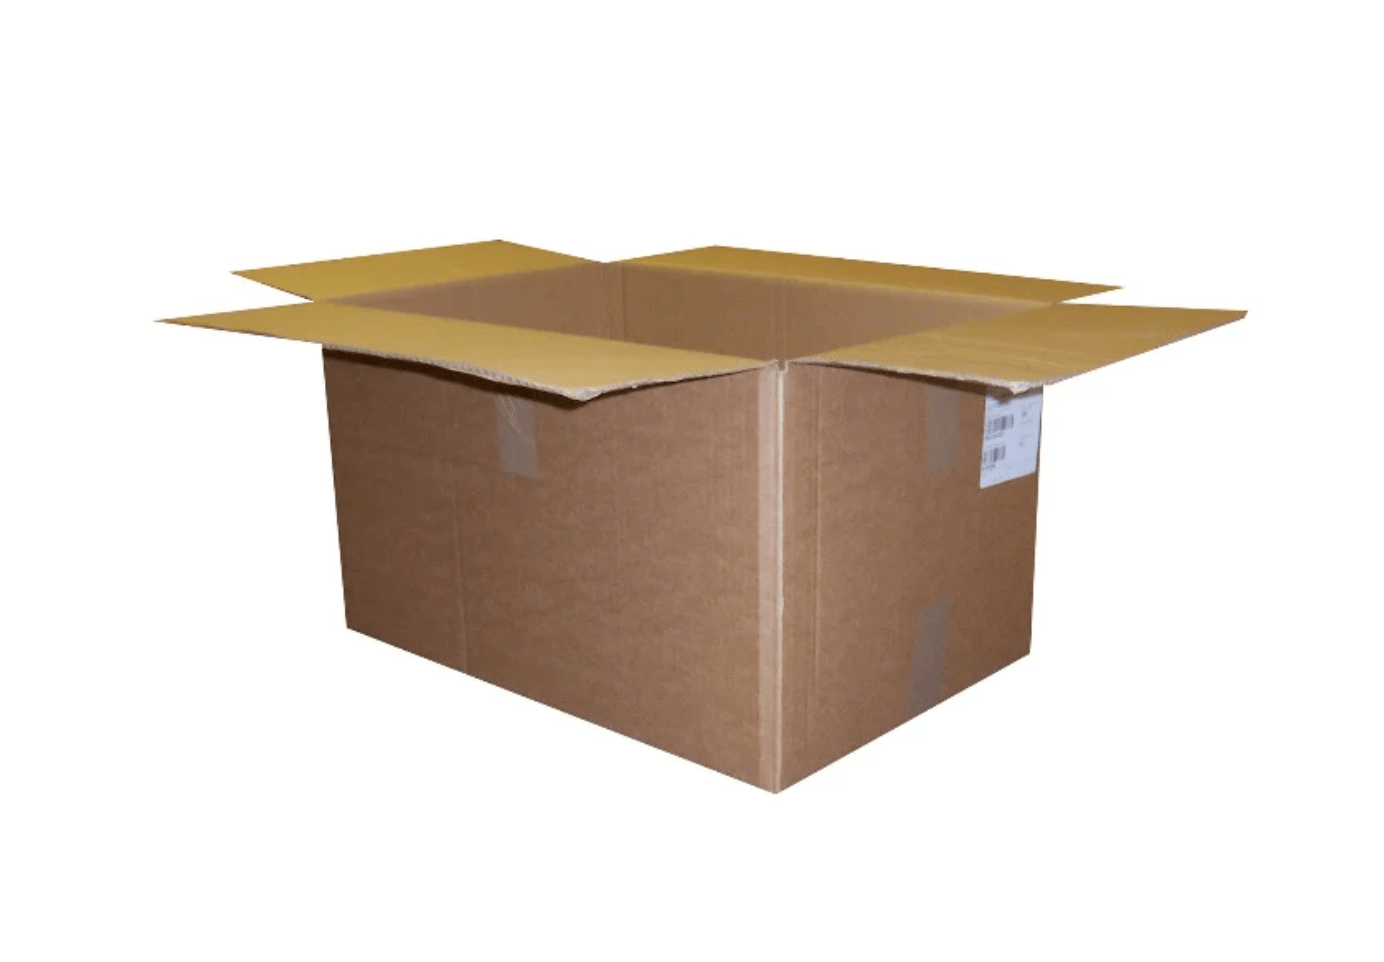 450 x Used Plain Strong Single Wall Box - 580 x 385 x 340mm - High Quality Recycled Once-Used Cardboard Boxes online - Black Country Boxes